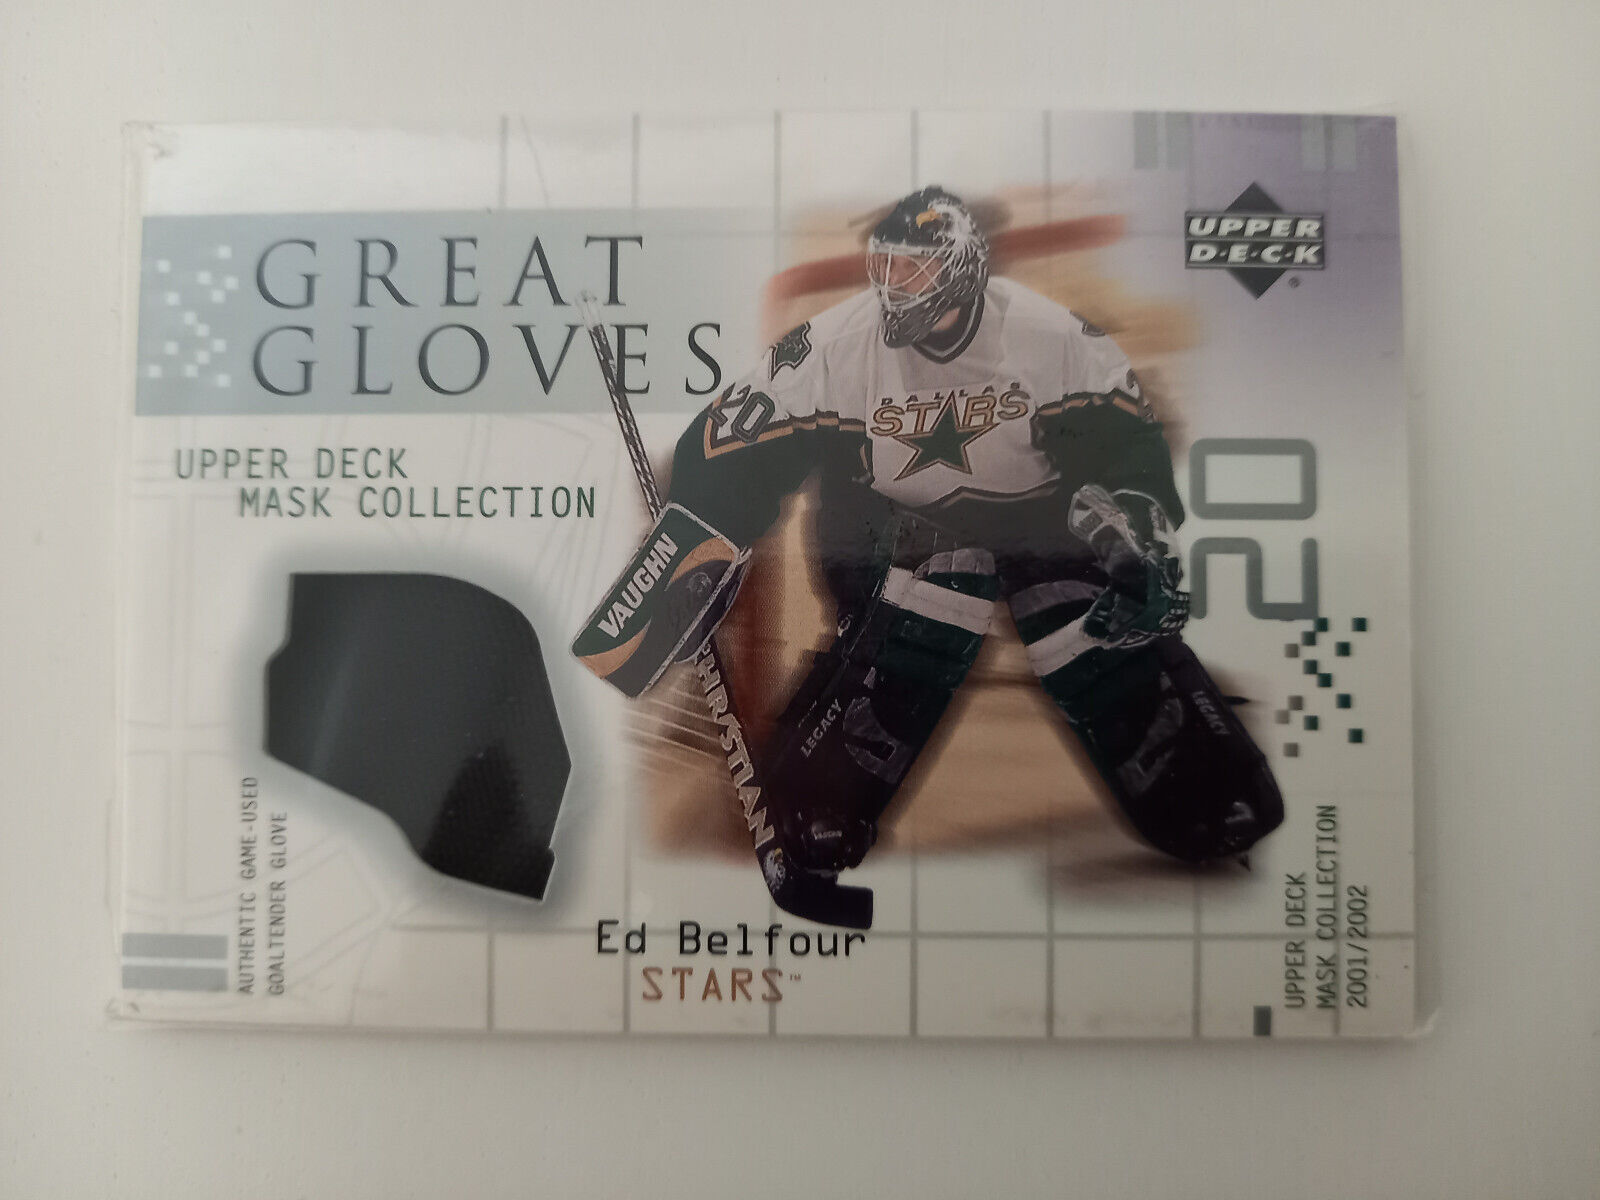 2001-02 UD MASK GAME USED GREAT GLOVES ED BELFOUR